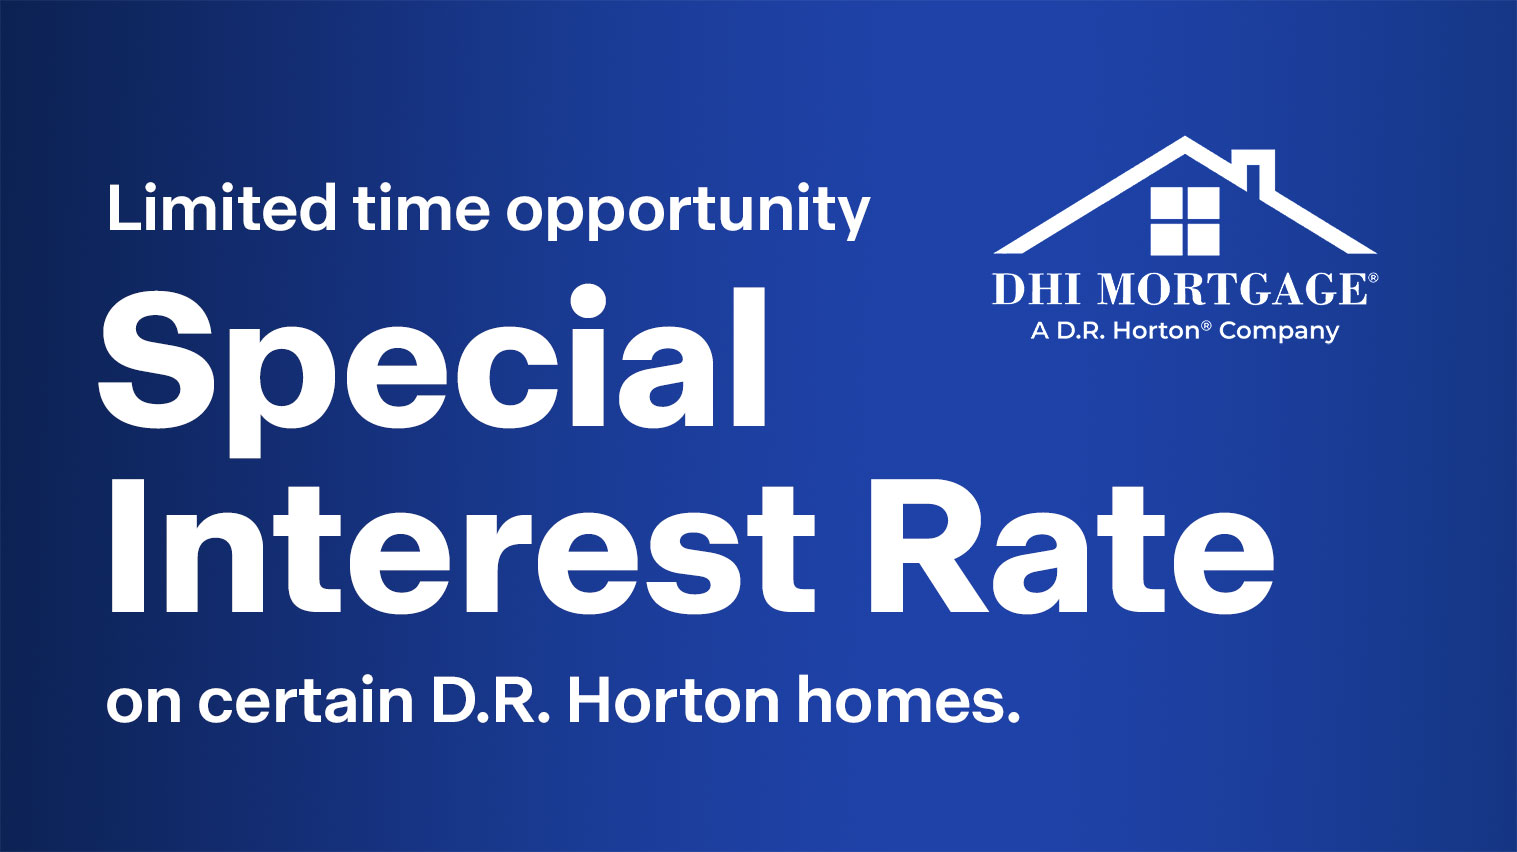 Limited time opportunity Special Interest Rate on certain D.R. Horton homes. 